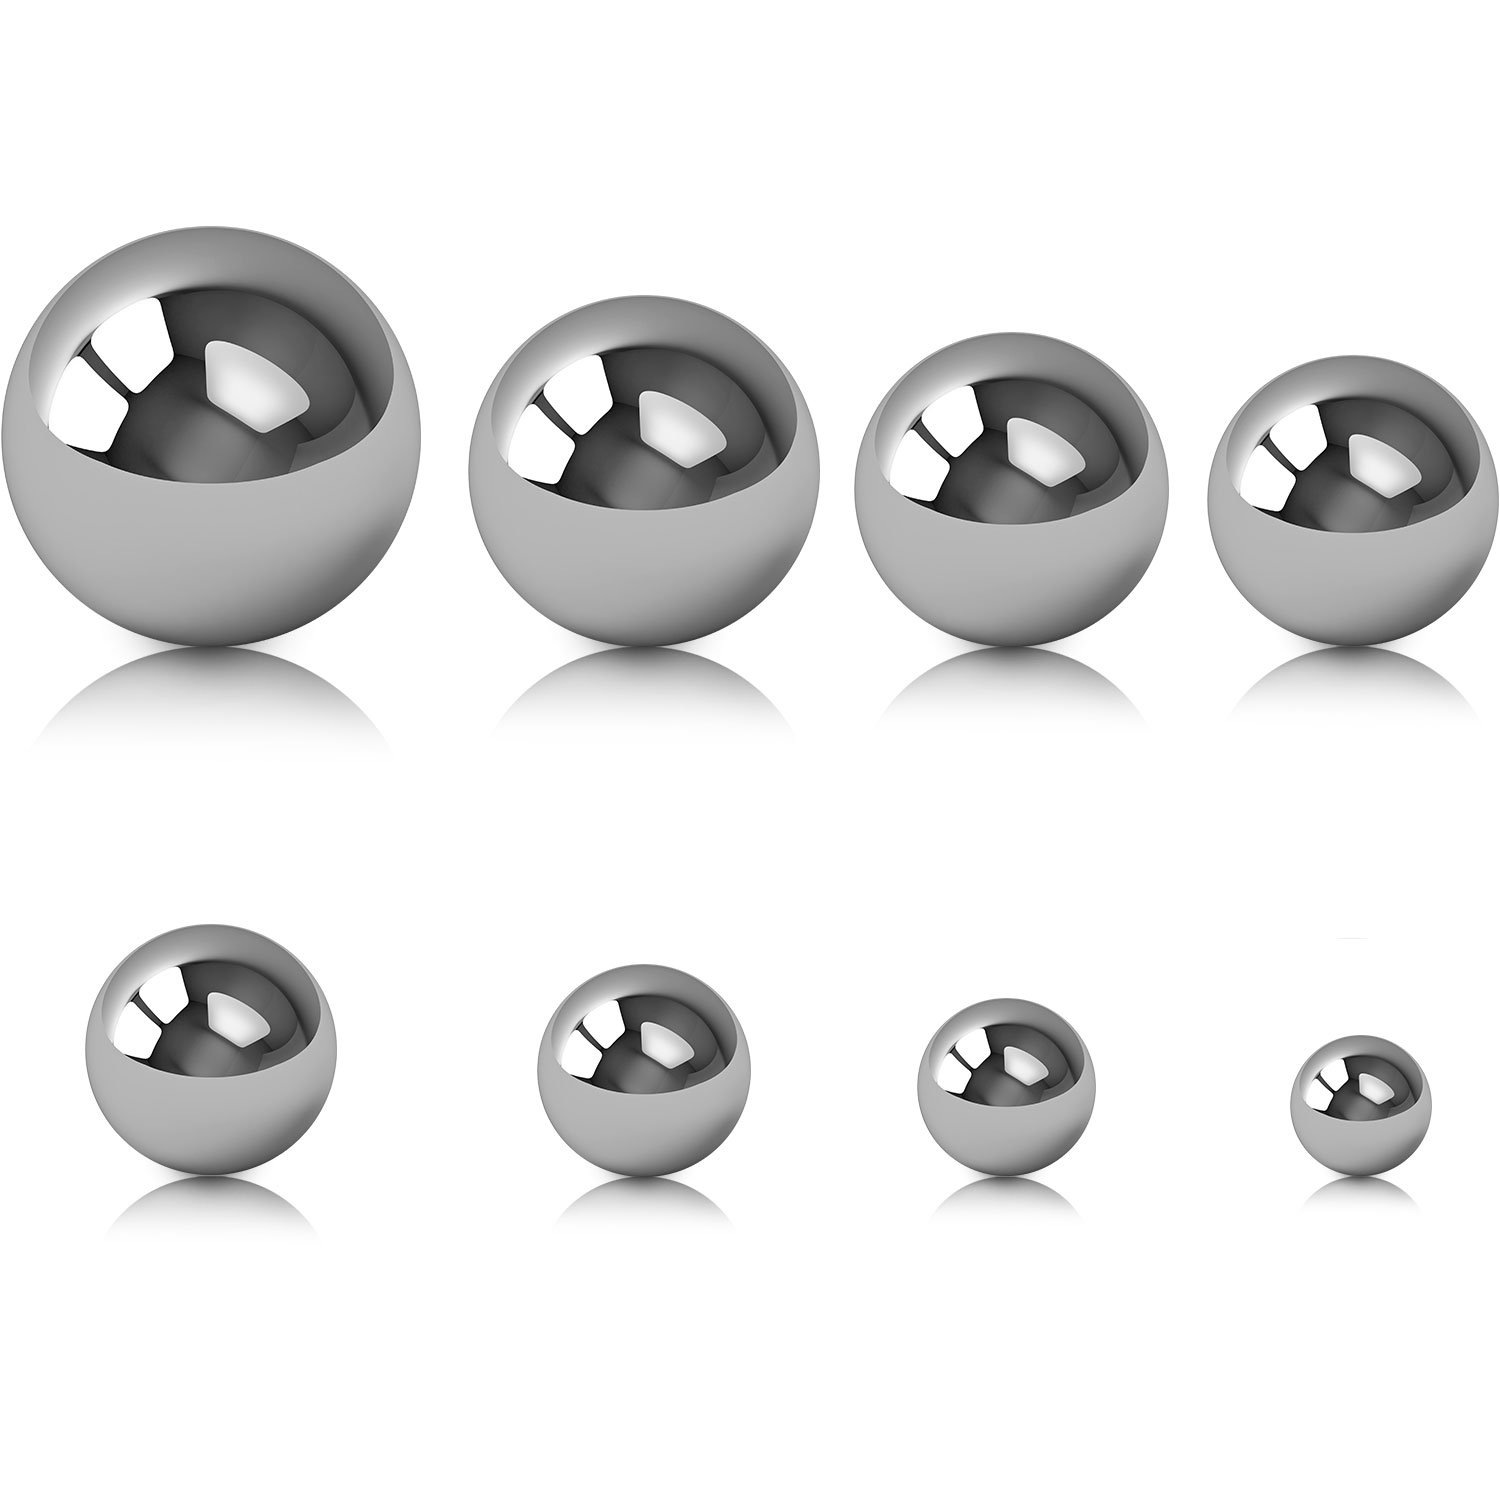 Steel Balls or Other Metal Objects